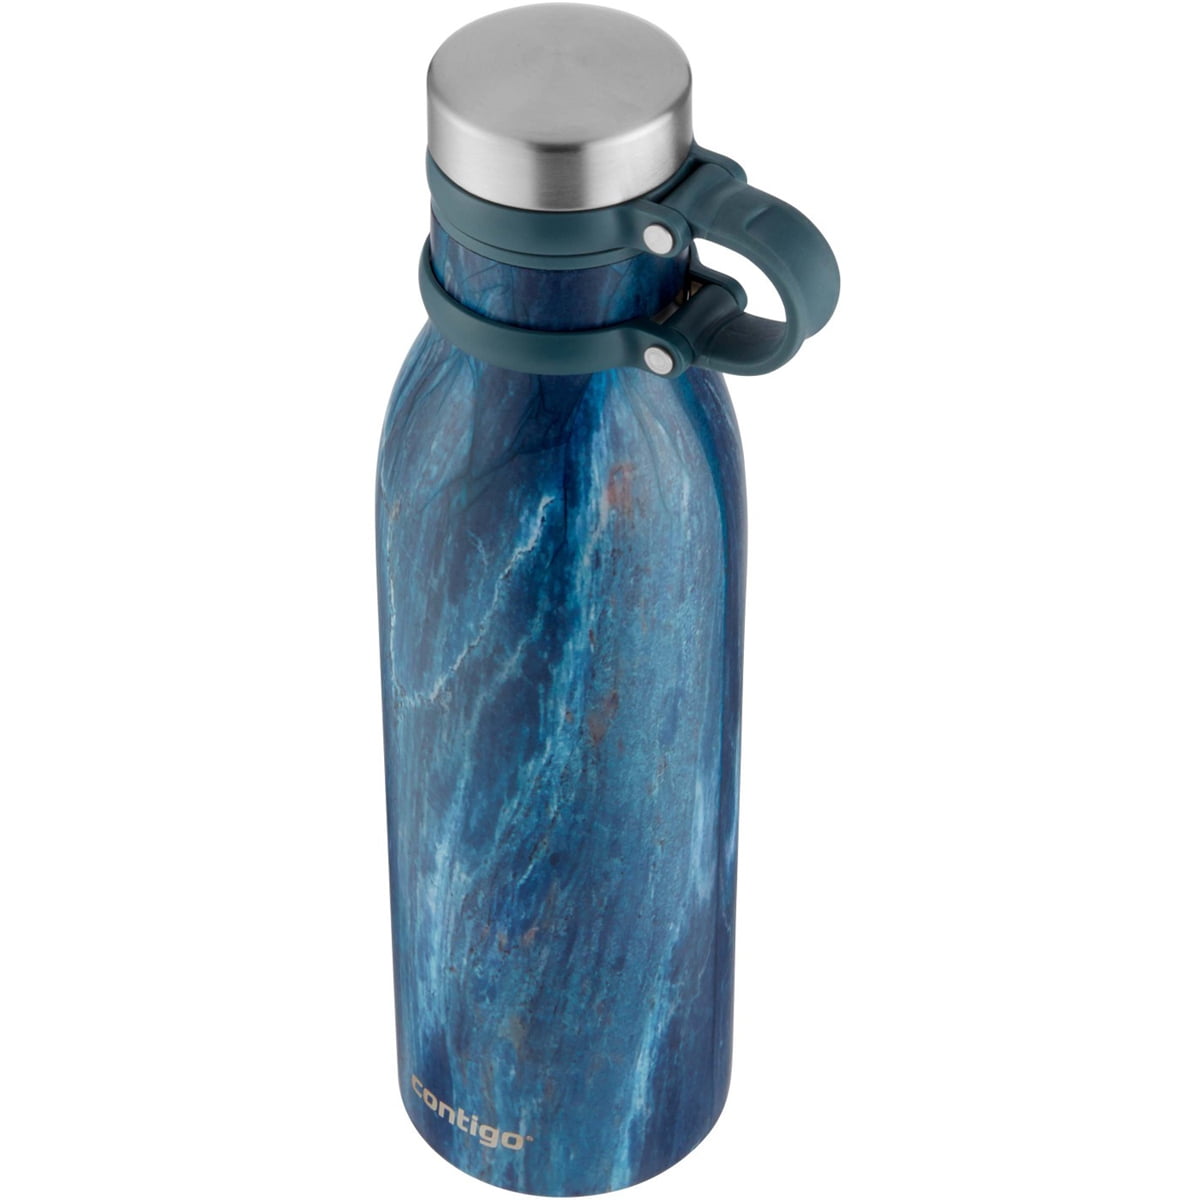  Contigo Matterhorn Water bottle with Thermalock insulation,  BPA-free stainless steel bottle with screw cap, leak-proof drinking bottle,  keeps beverages up to 24h cold/up to 10h hot, 590 ml : Home 